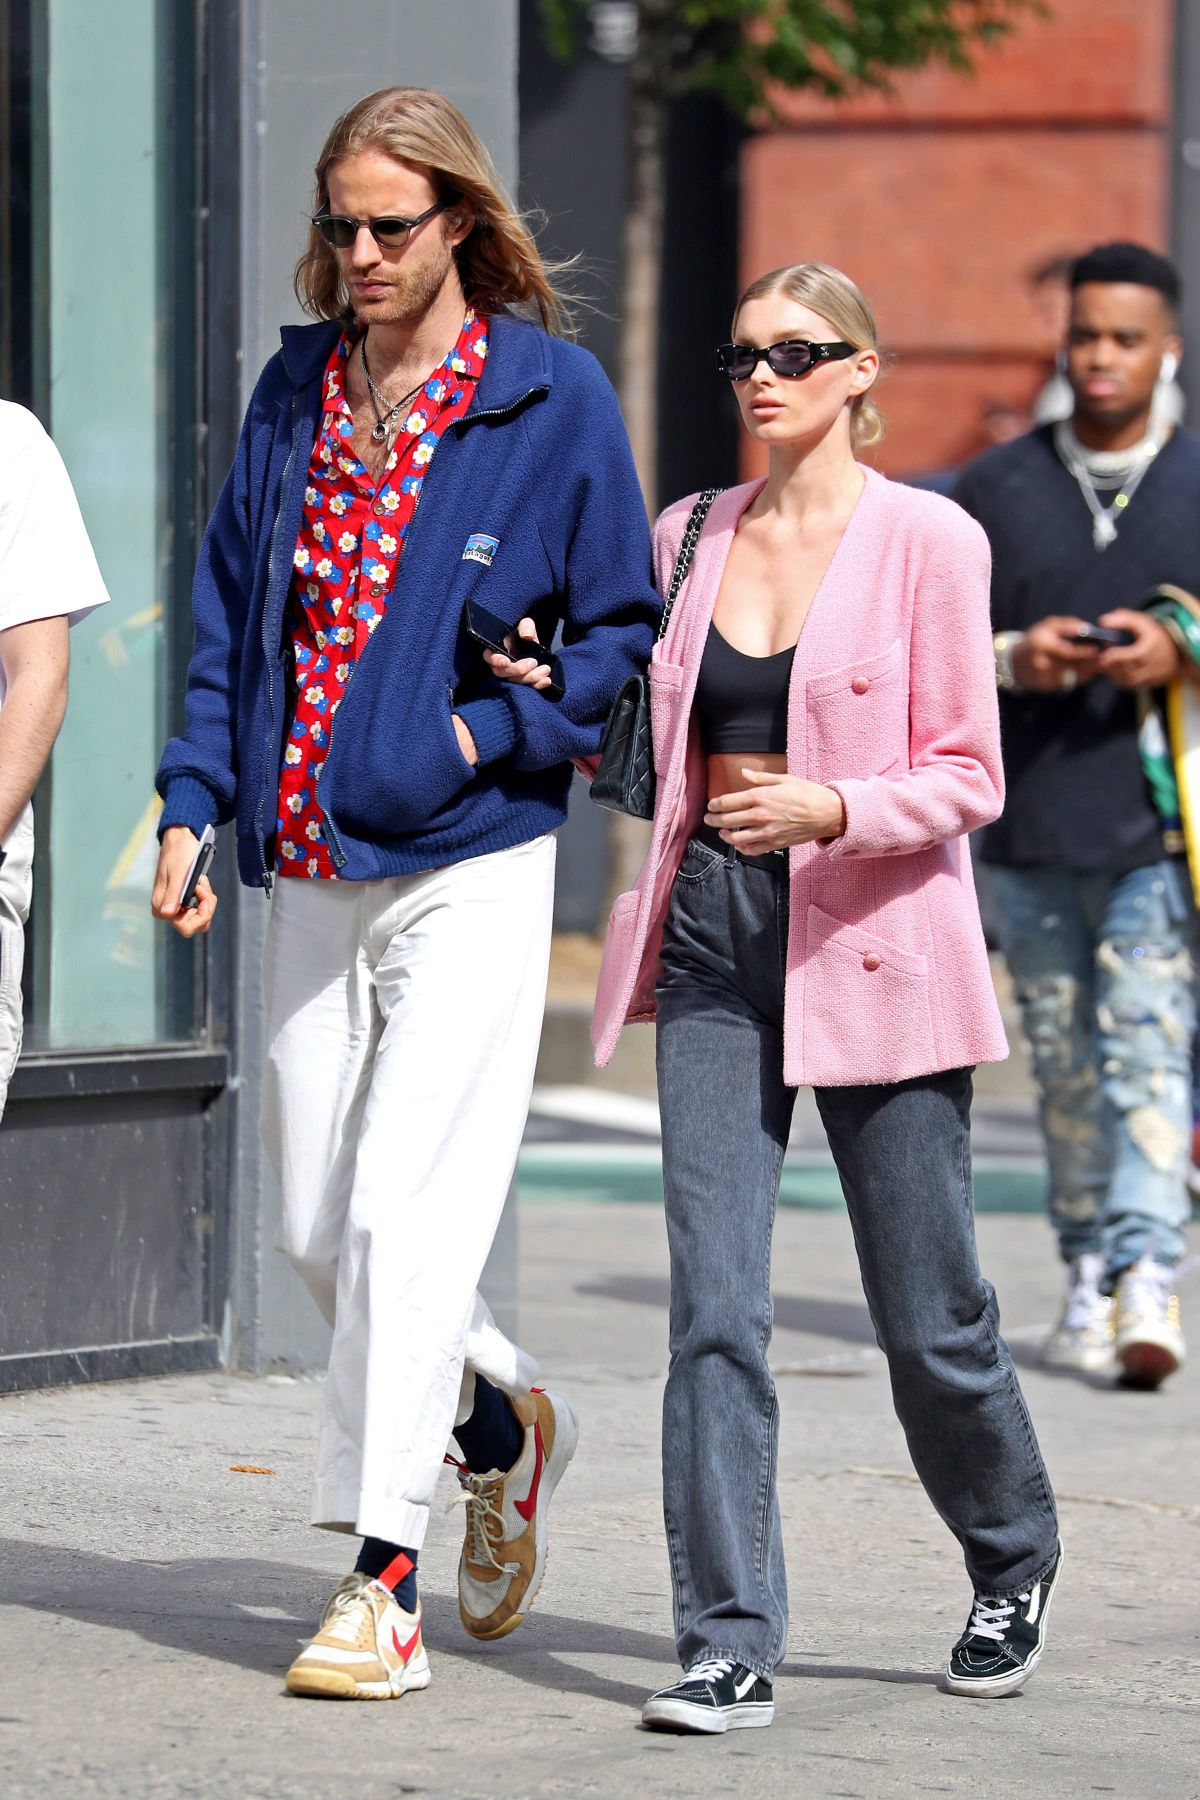 elsa-hosk-and-tom-daly-out-in-new-york-05-09-2019-4.jpg